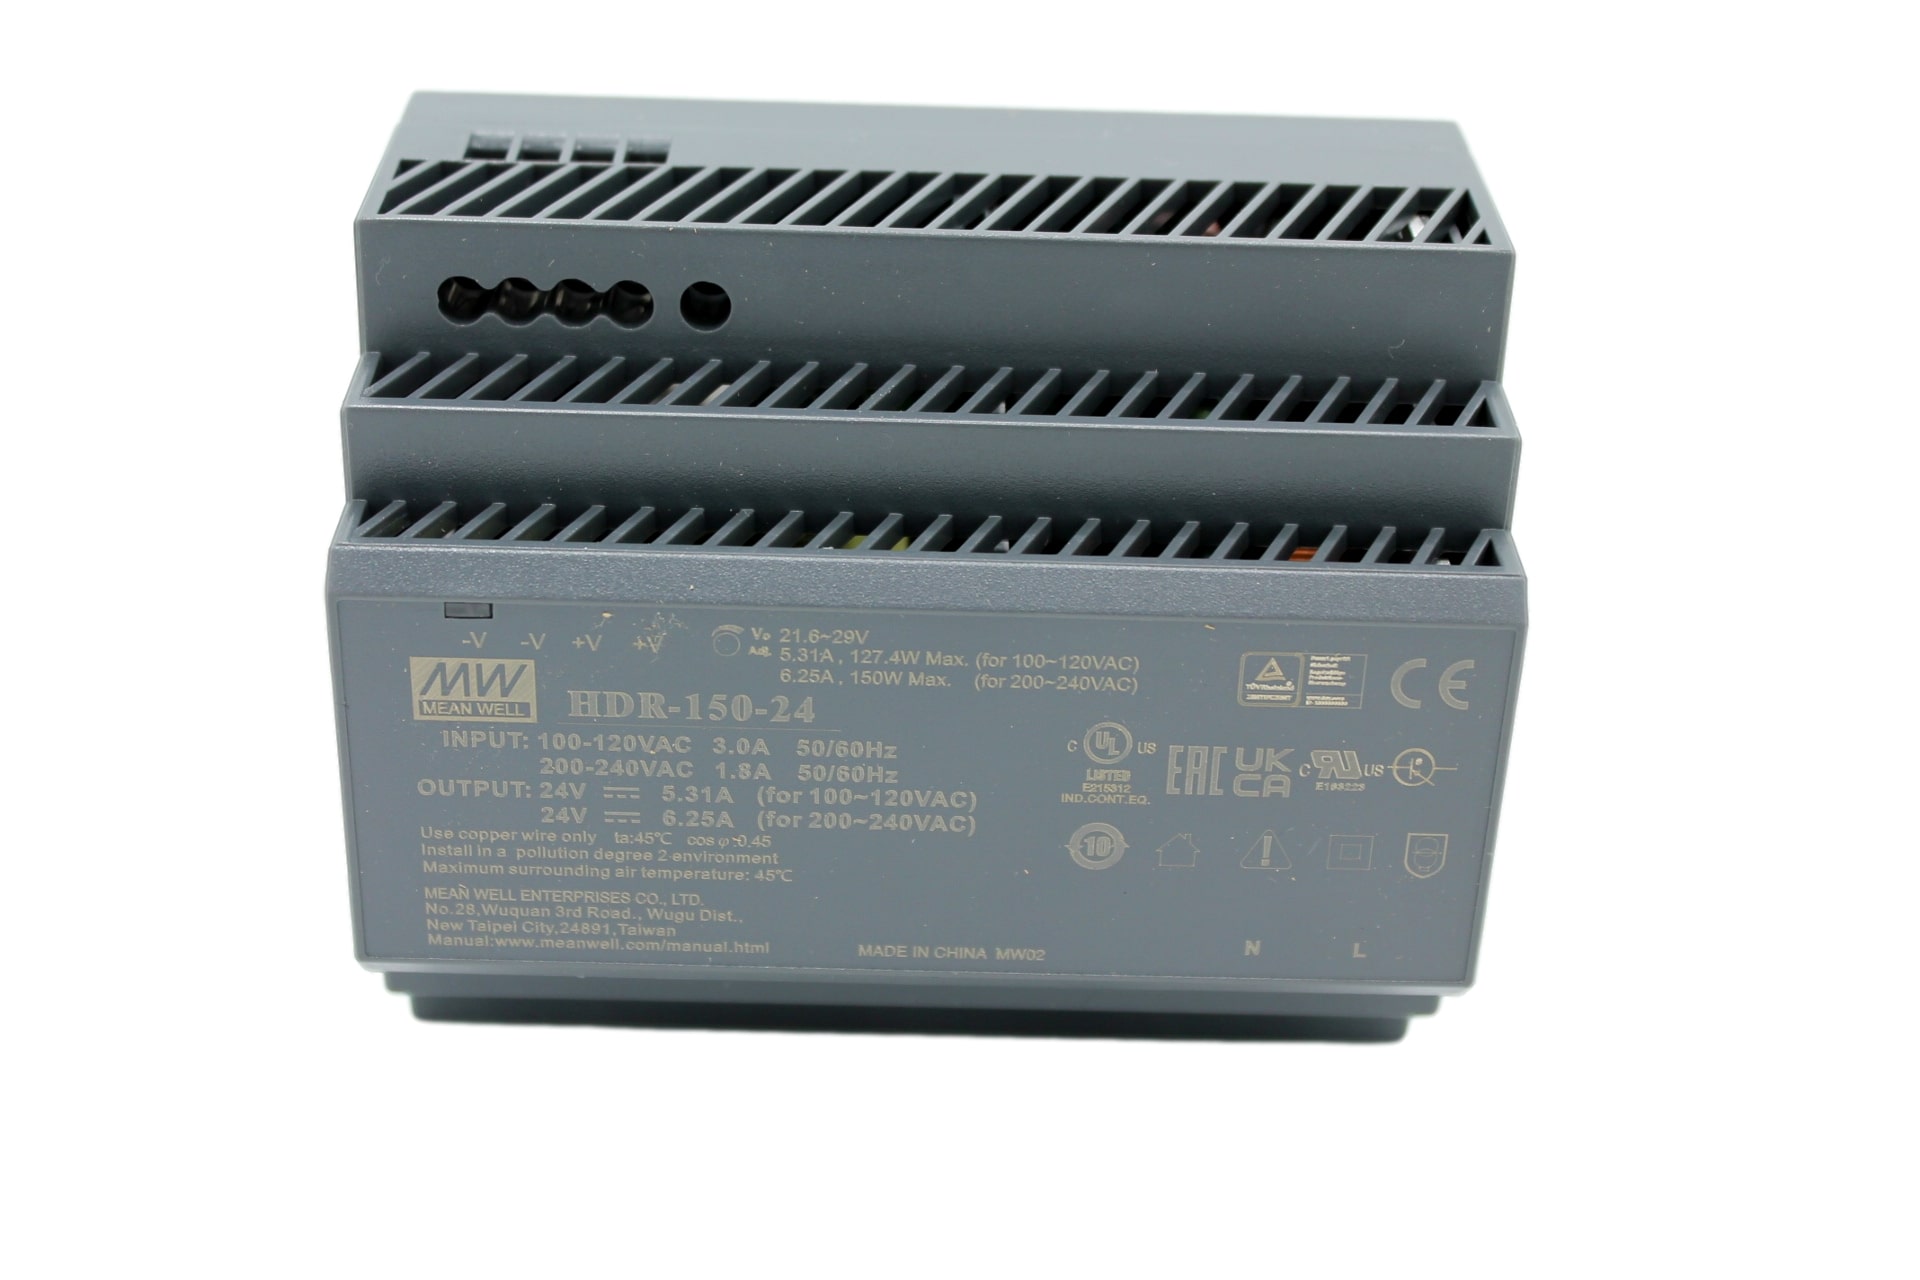 HDR-150-24 DIN rail power supply, 150W, 24V, 6.25A, MEAN WELL